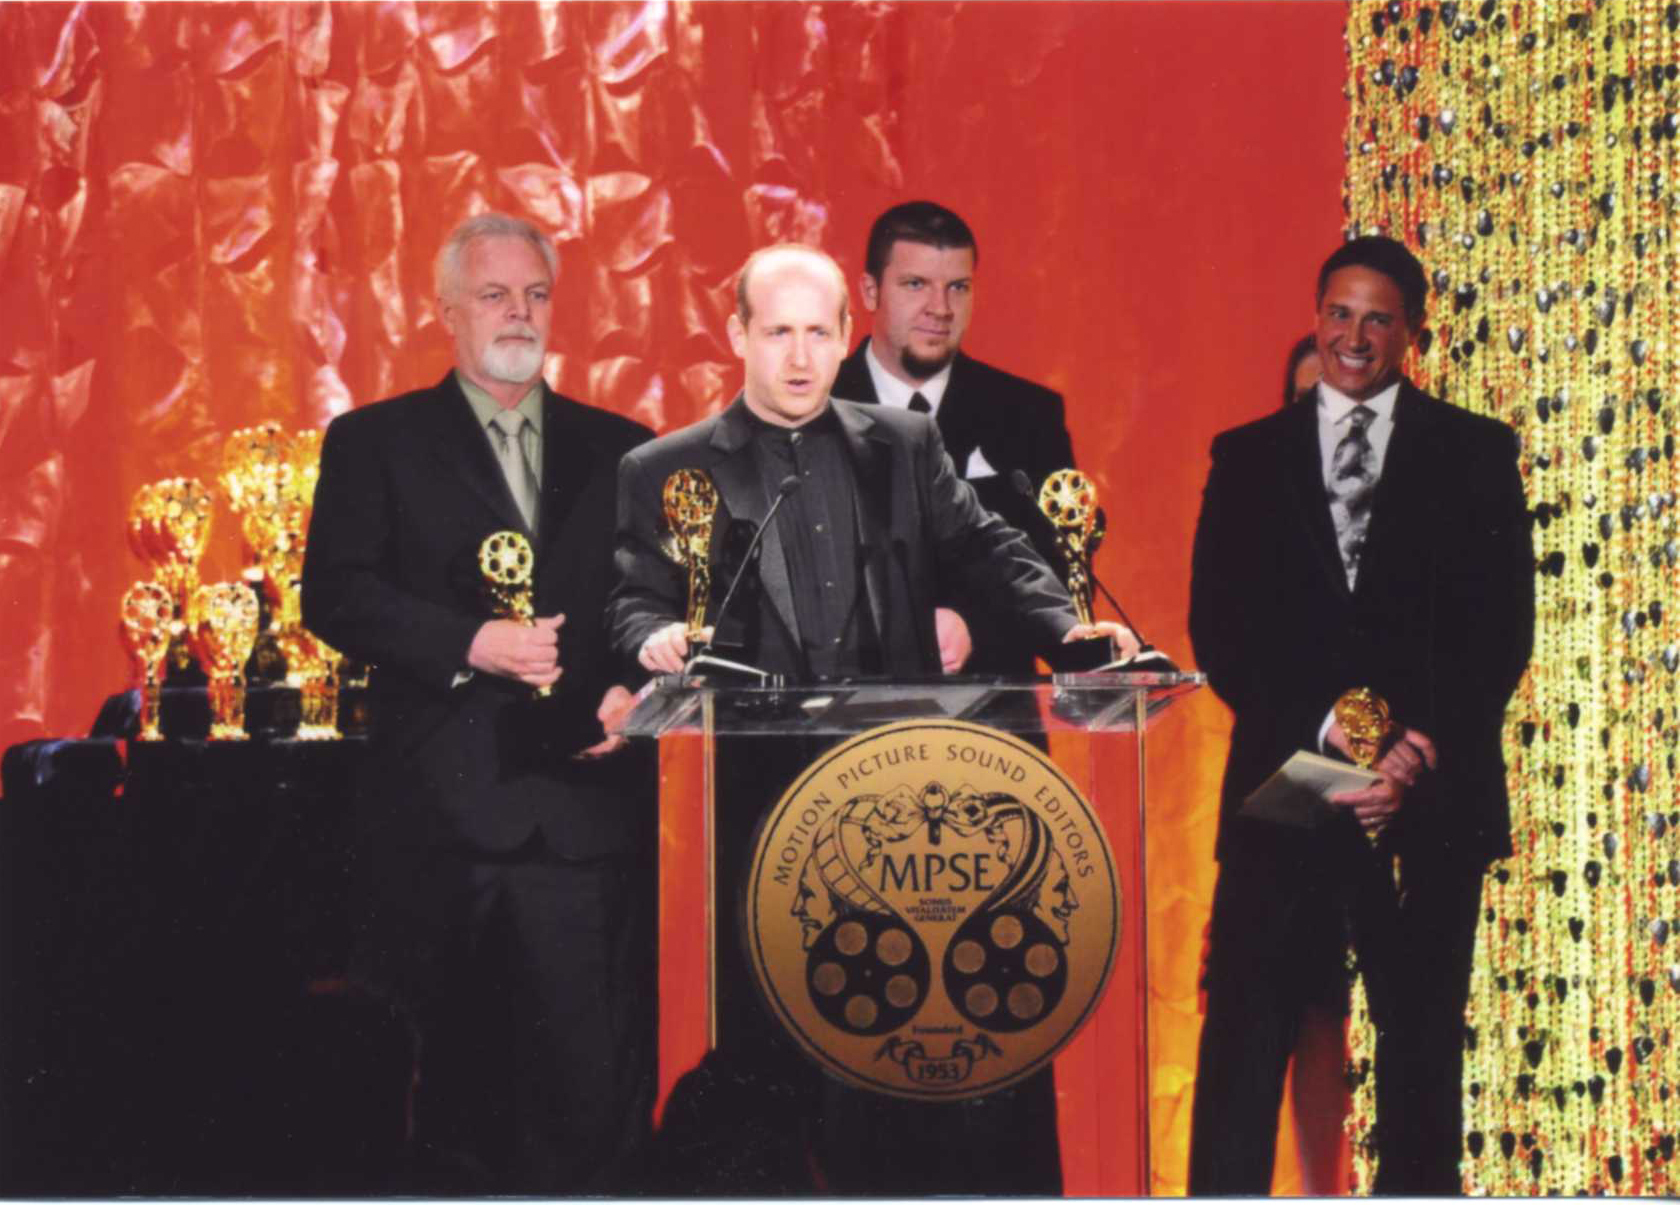 2010 MPSE Golden Reel Awards - Best Sound Editing For A Series, 